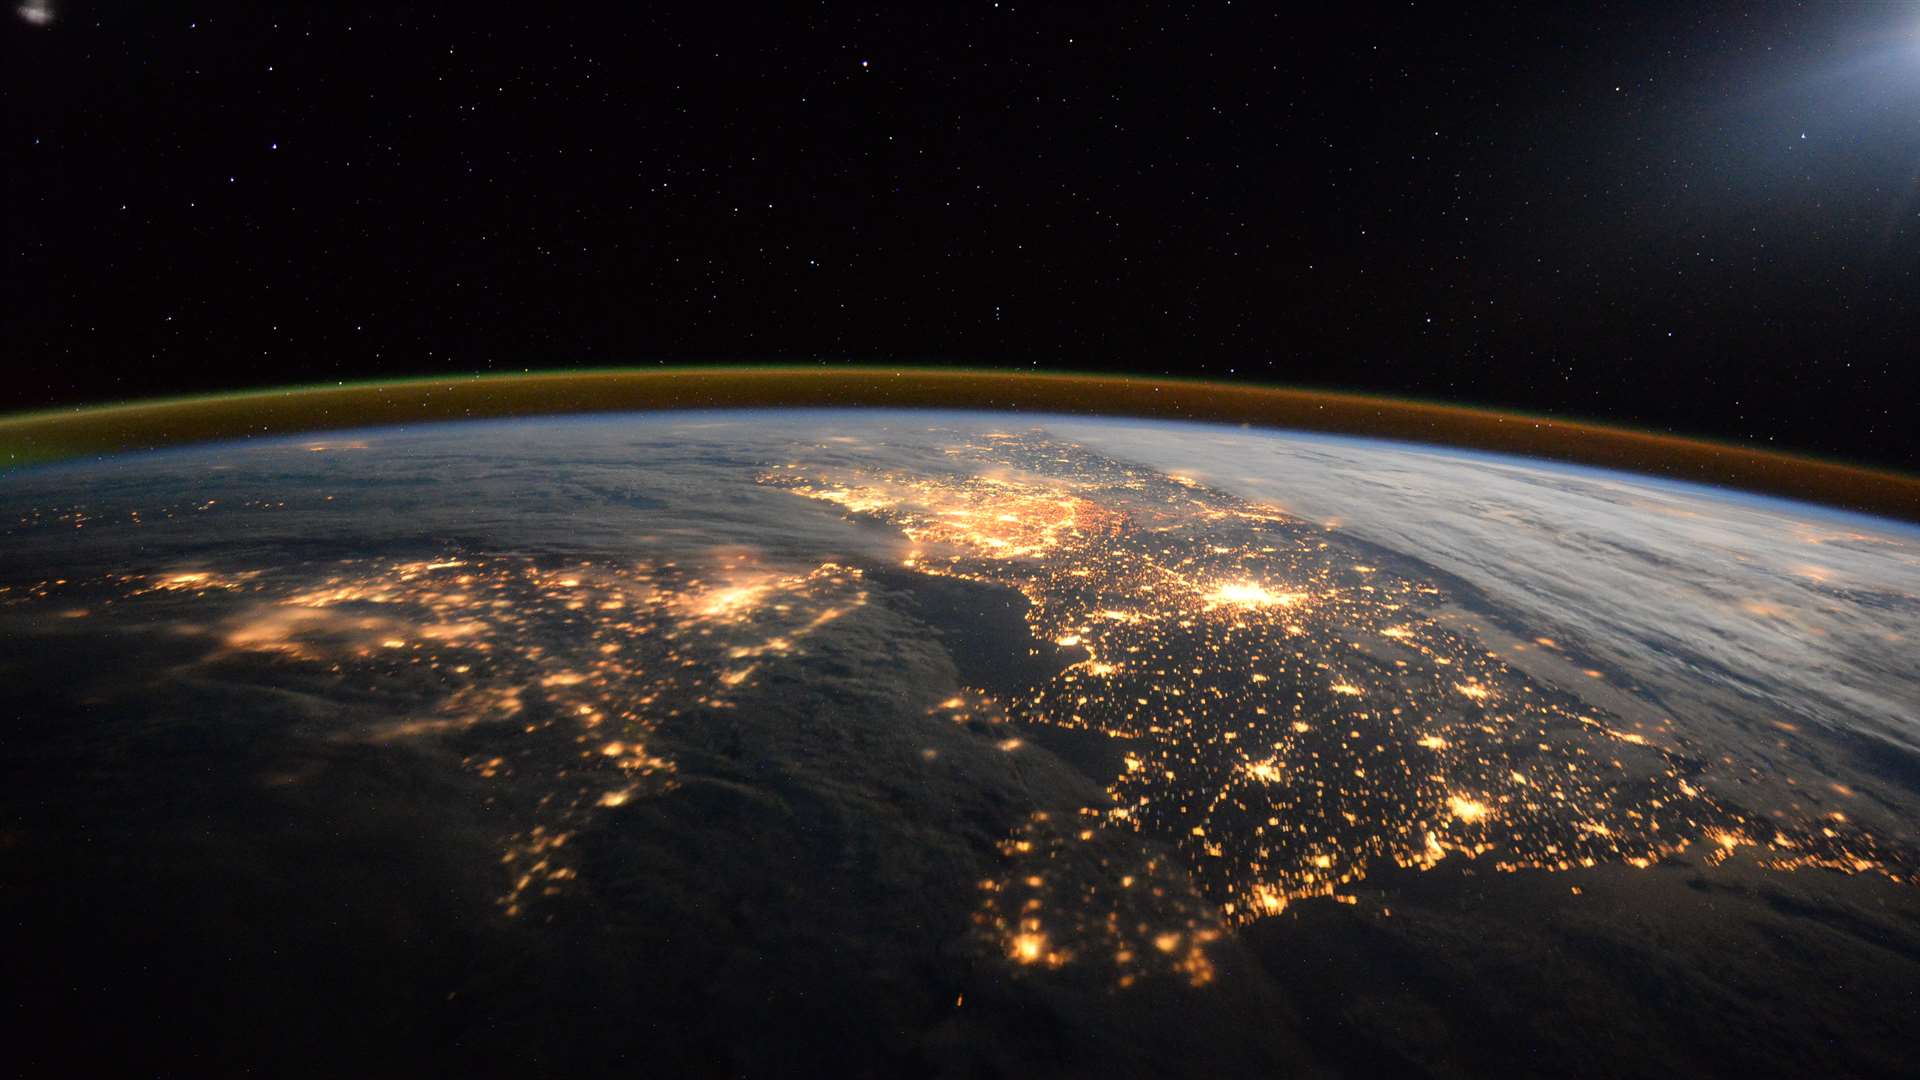 The UK at night taken by Tim Peake from the International Space Station. Picture: Tim Peake flickr